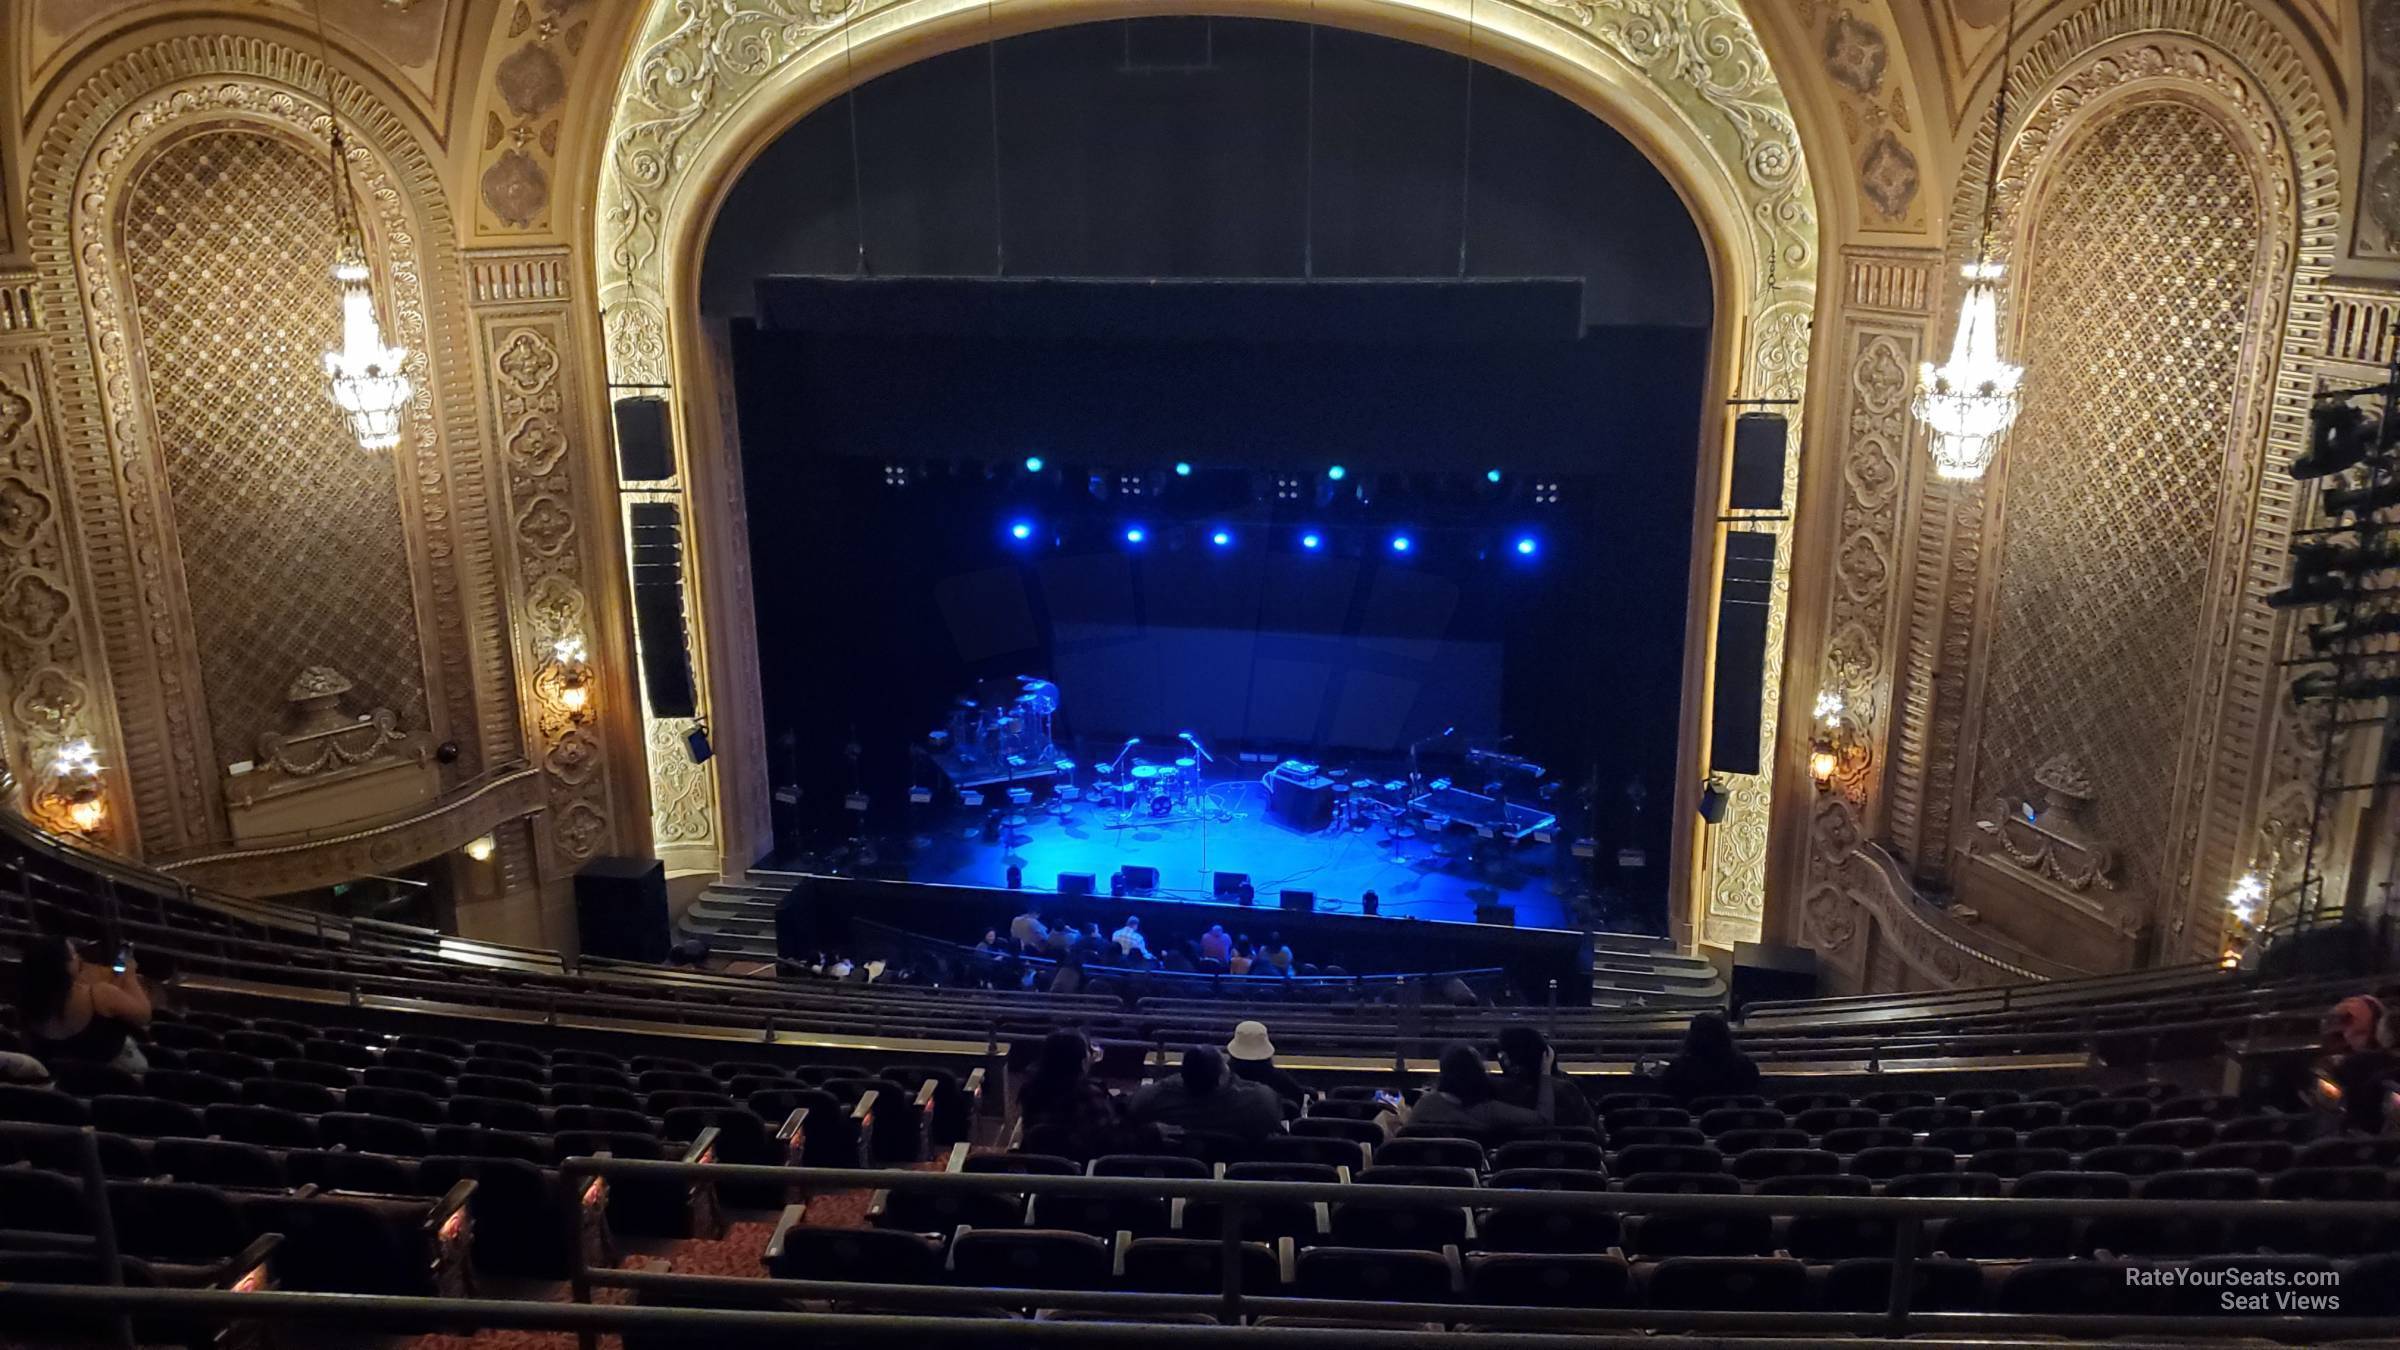 section 22, row m seat view  - paramount theatre - seattle